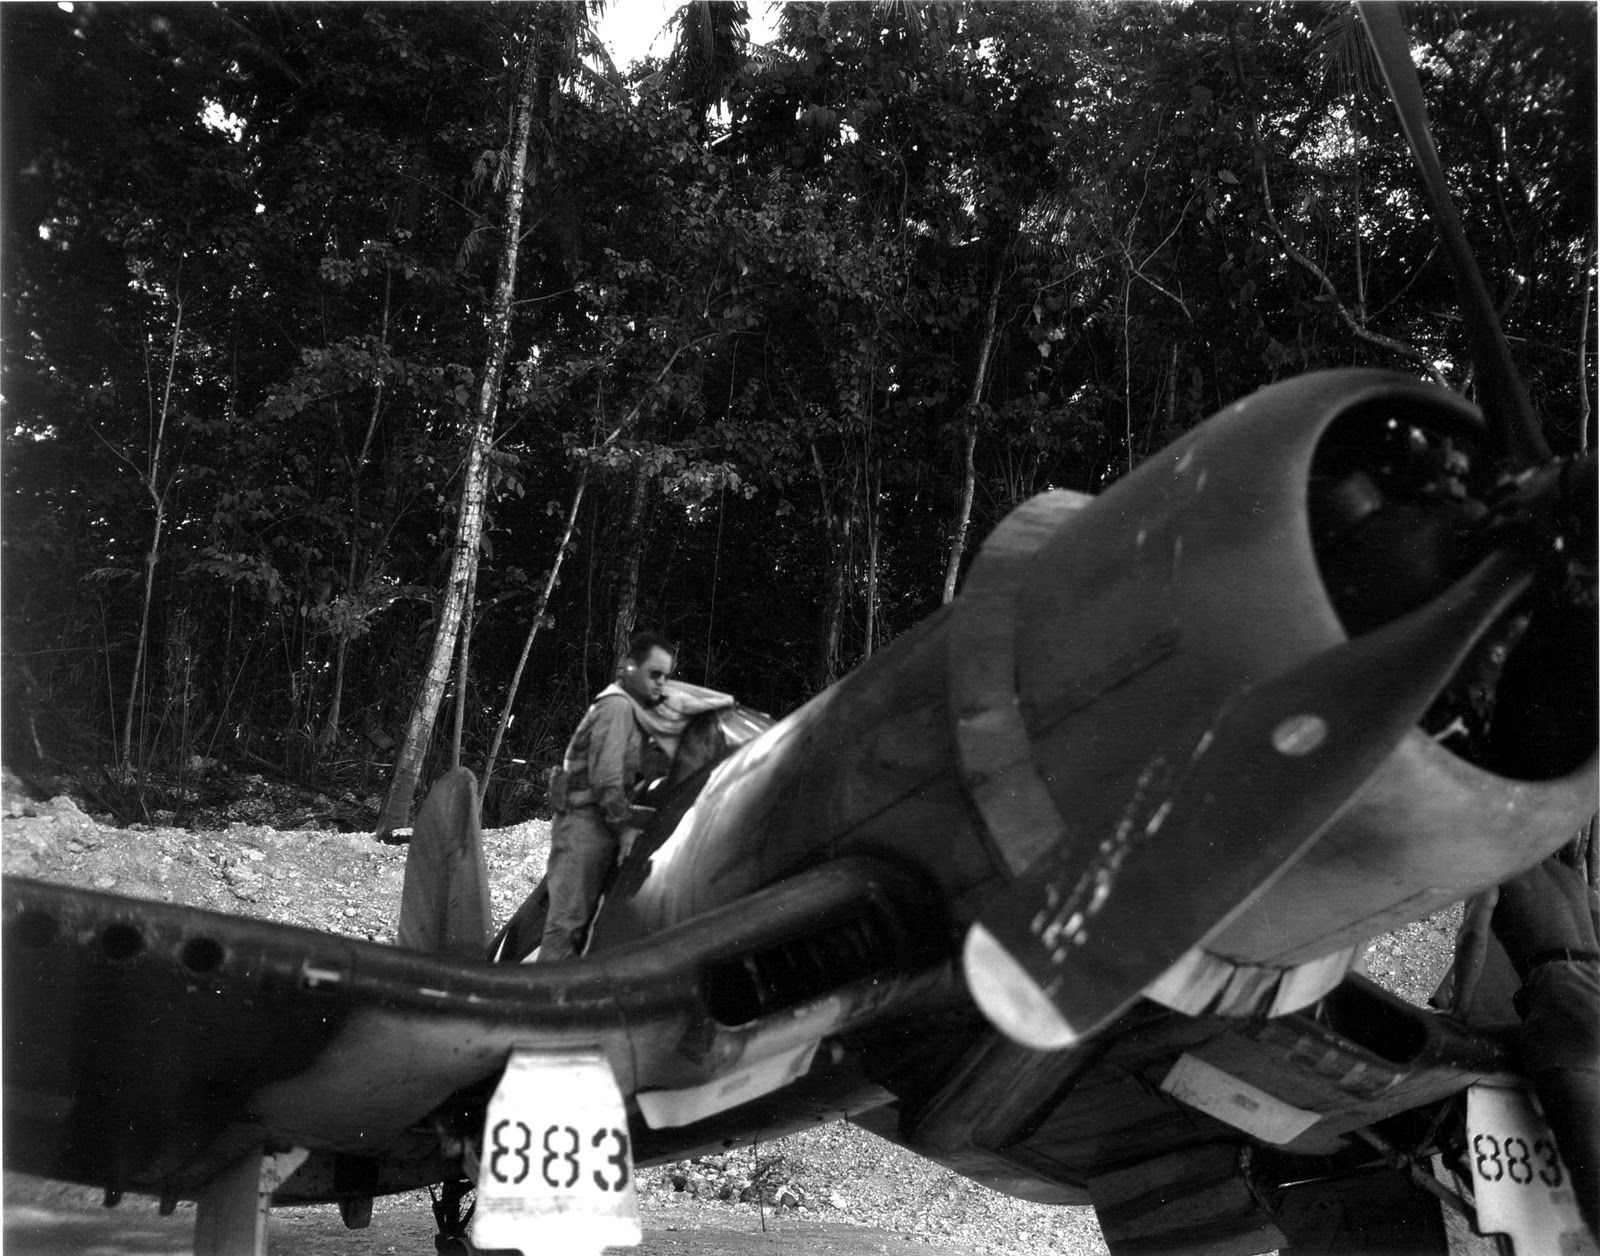 Marine Major Gregory “Pappy” Boyington, Commanding Officer of VMF-214 the “Black Sheep” and later Medal of Honor recipient, boards his F4U-1 Corsair at the Barakoma airstrip on Vella LaVella Island, Solomons, Dec 1943.